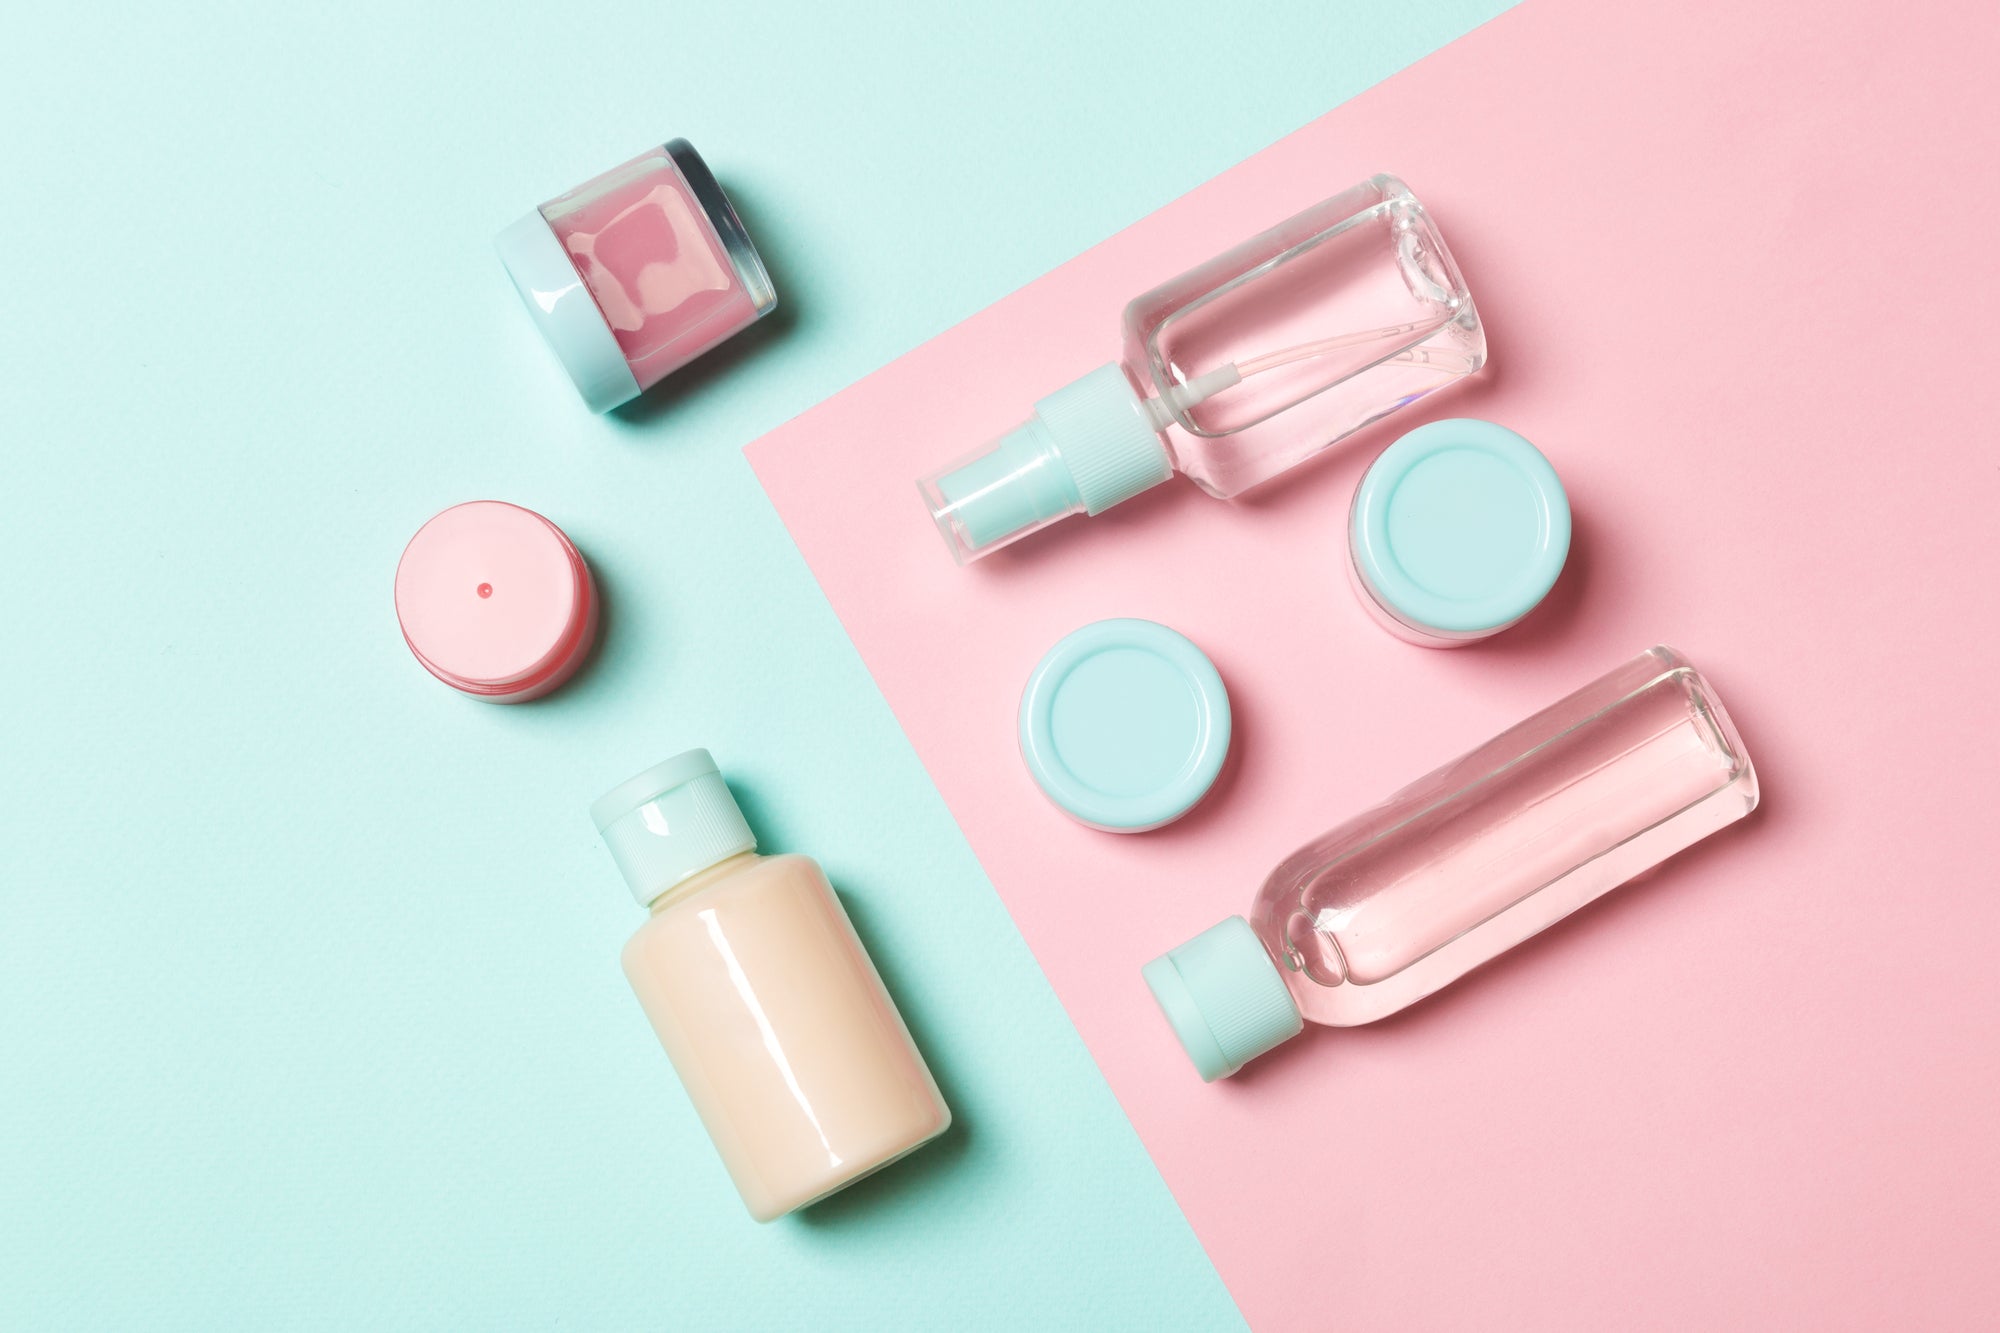 Best Clean Beauty Brands at Target: 50 Natural Brands - Organic Beauty Lover